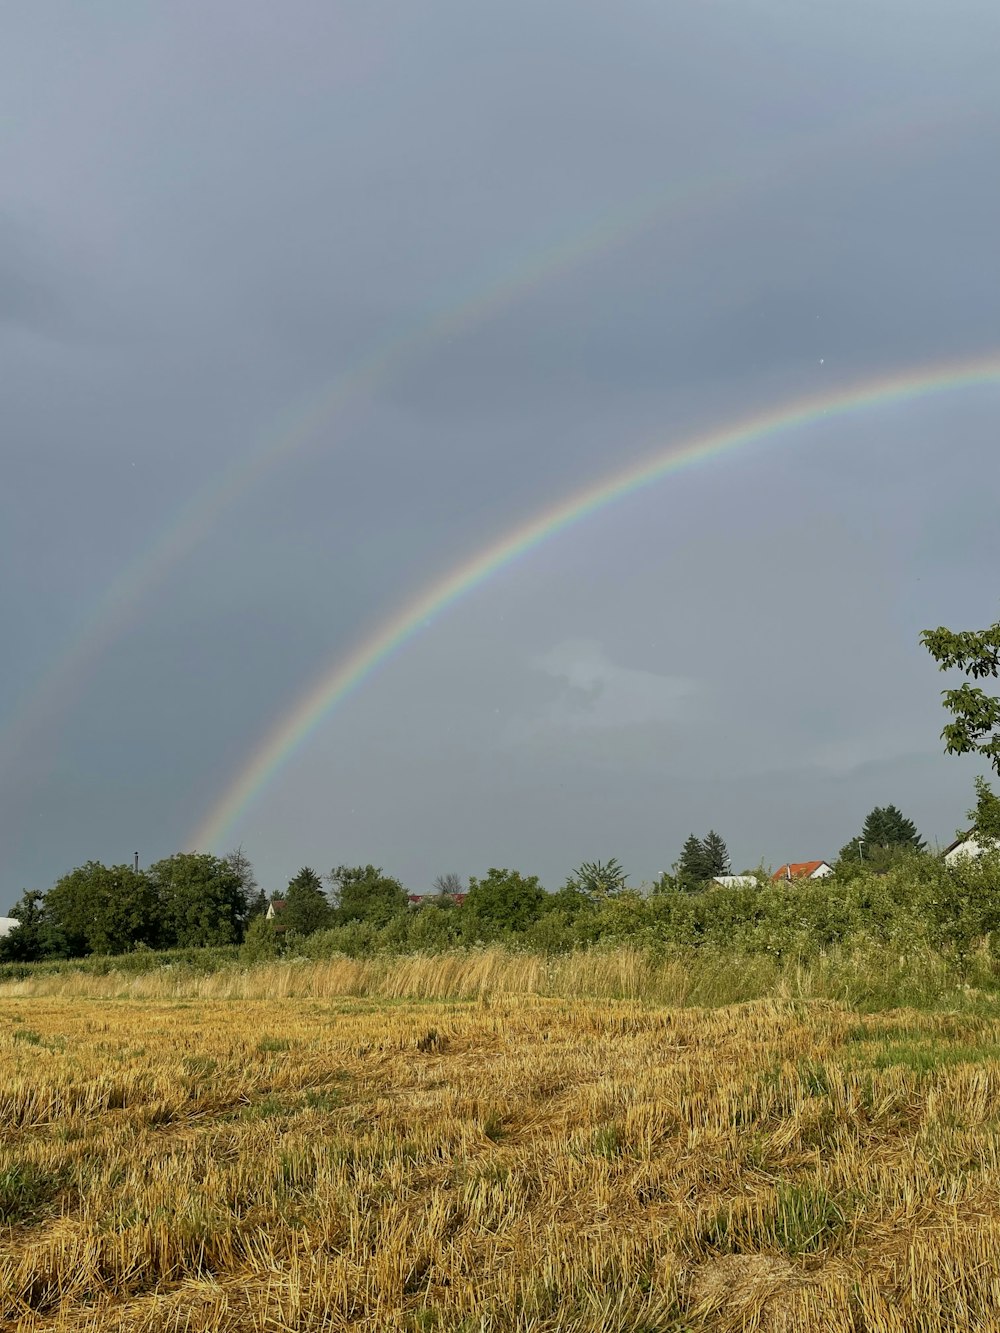 a double rainbow in the sky over a field